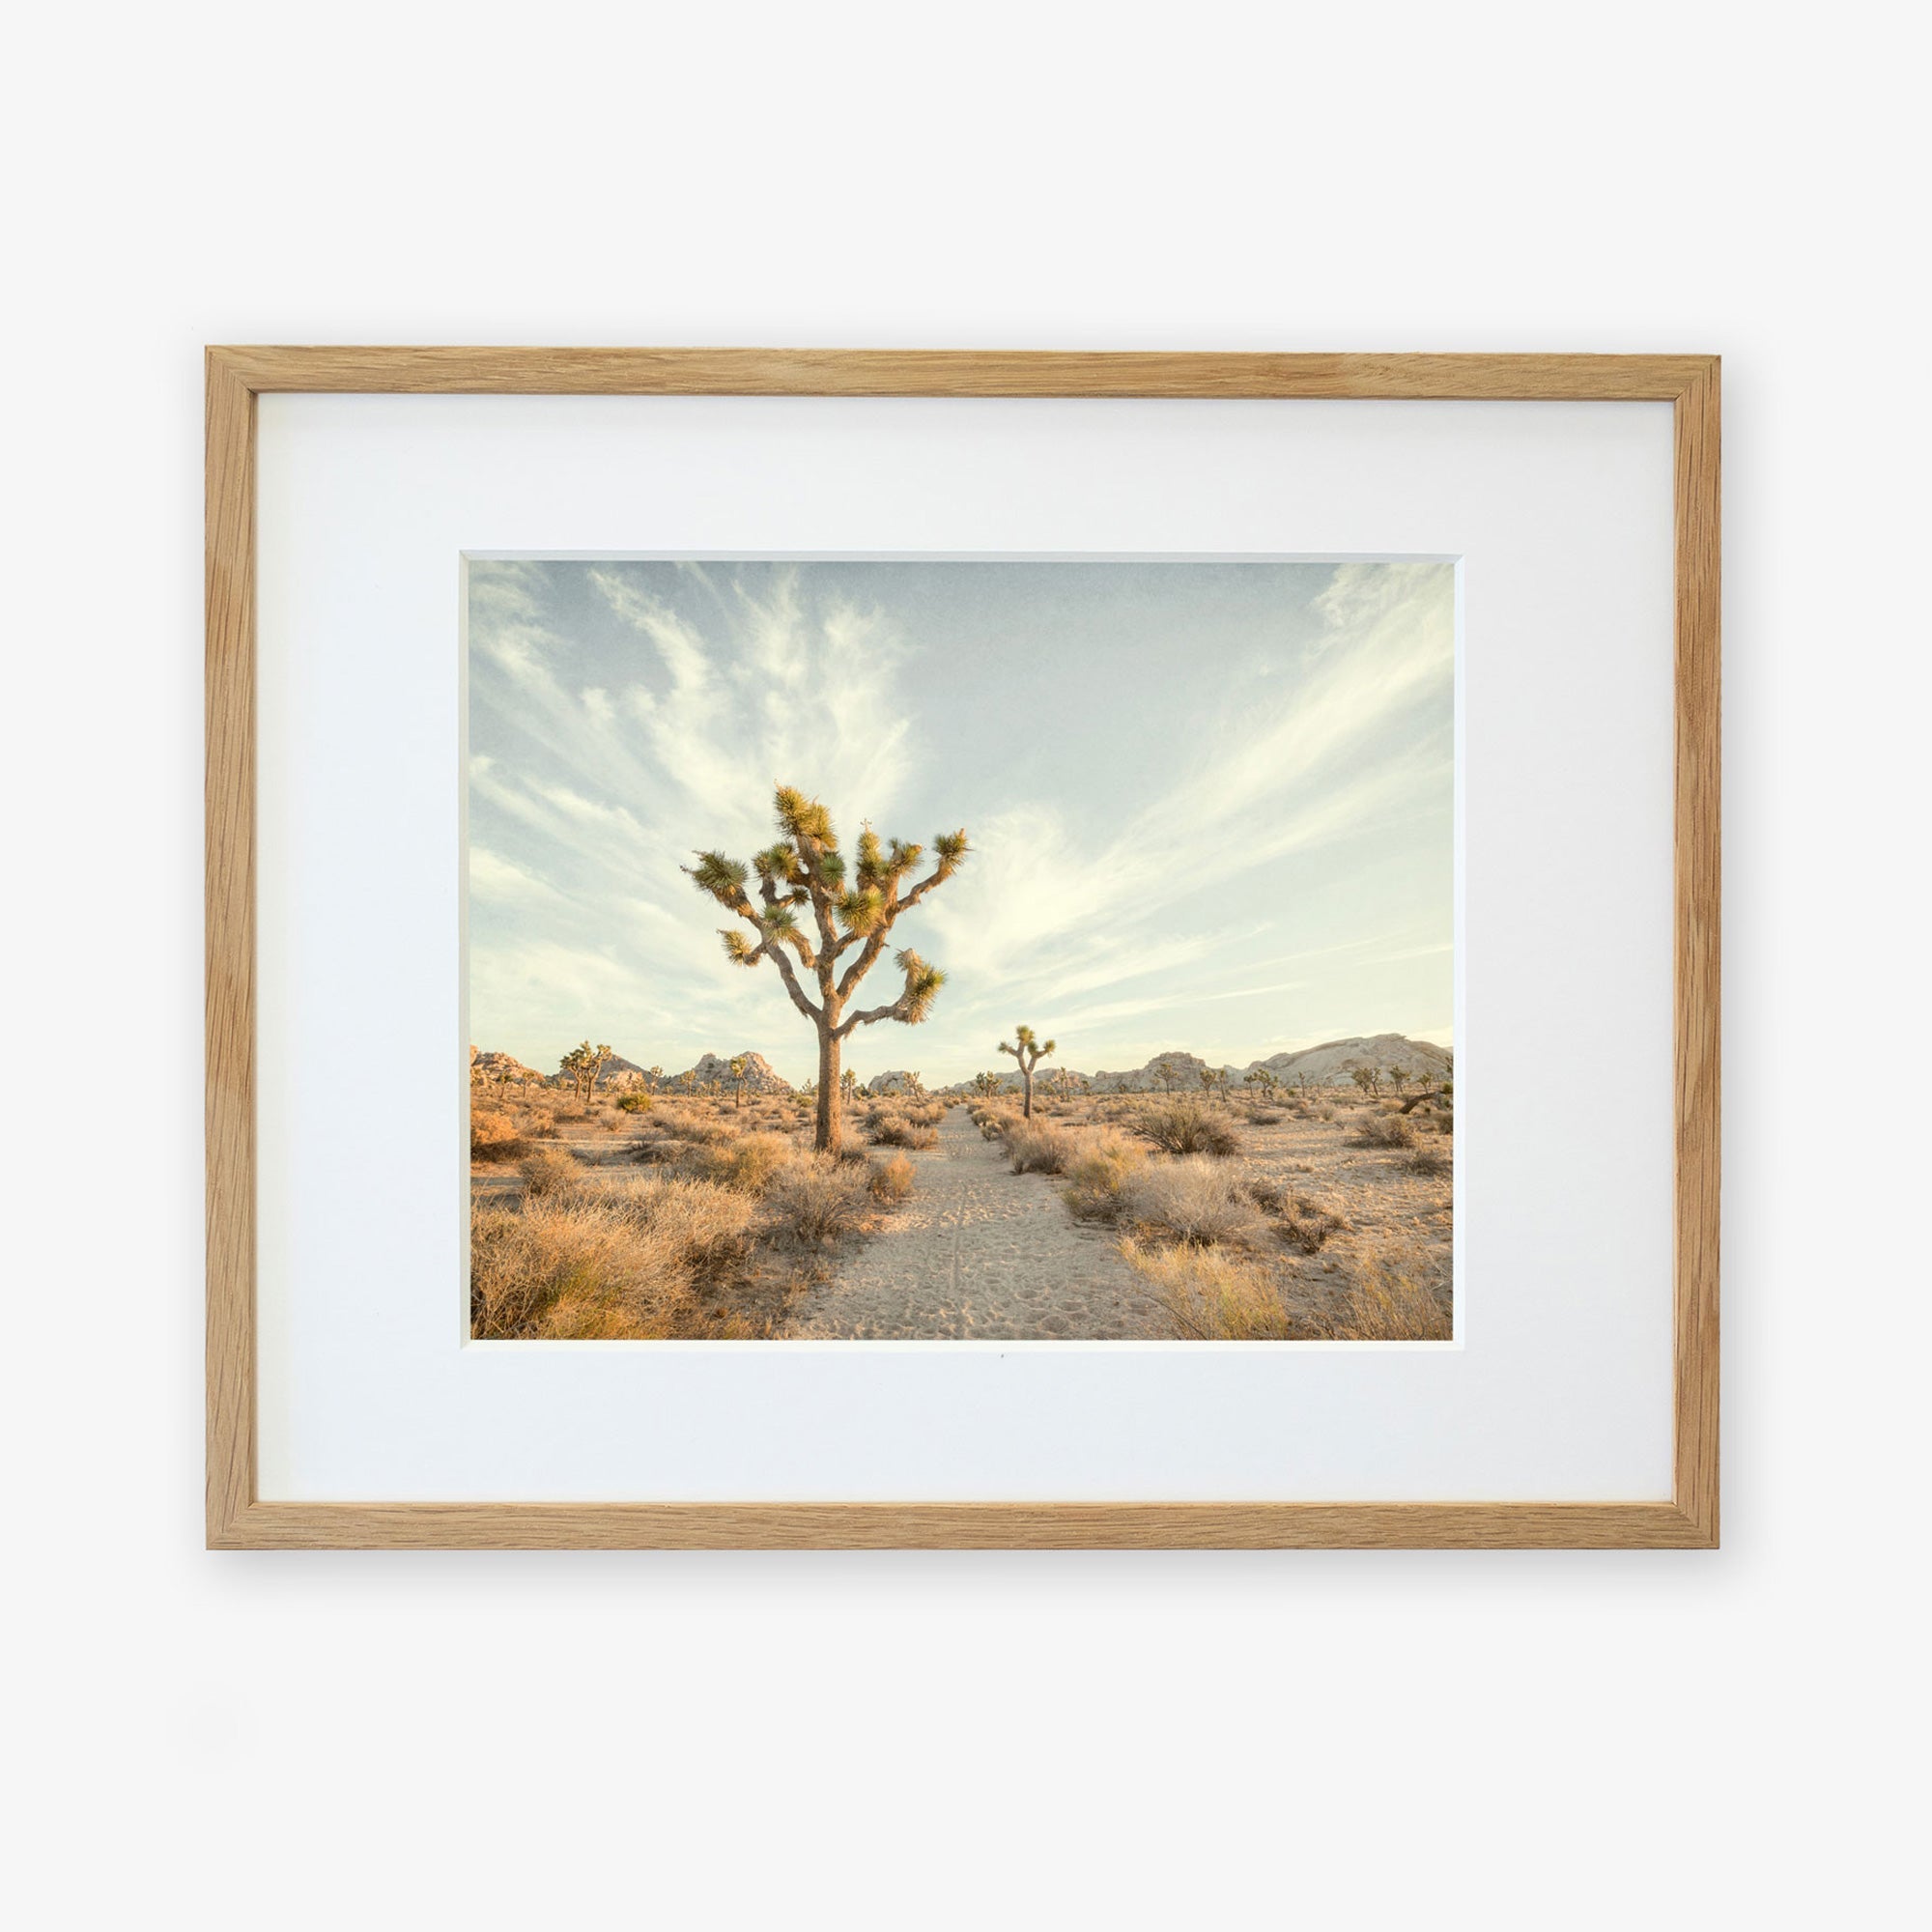 A framed photograph on archival photographic paper of a desert landscape featuring a Joshua Tree Print, 'Path to Joshua' in the foreground, under a clear sky, surrounded by arid terrain with sparse vegetation by Offley Green.